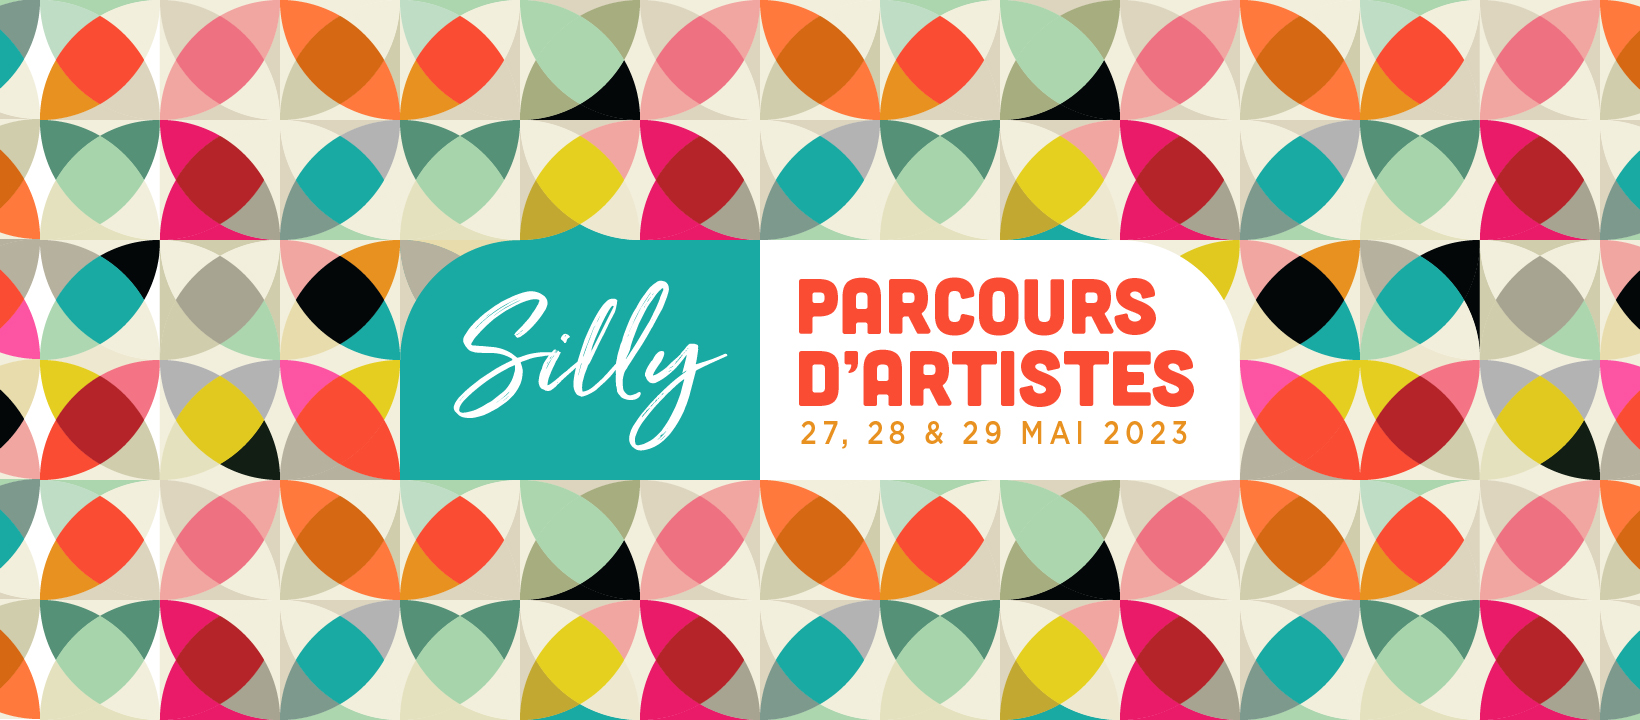 Silly Parcours d'artistes 2023